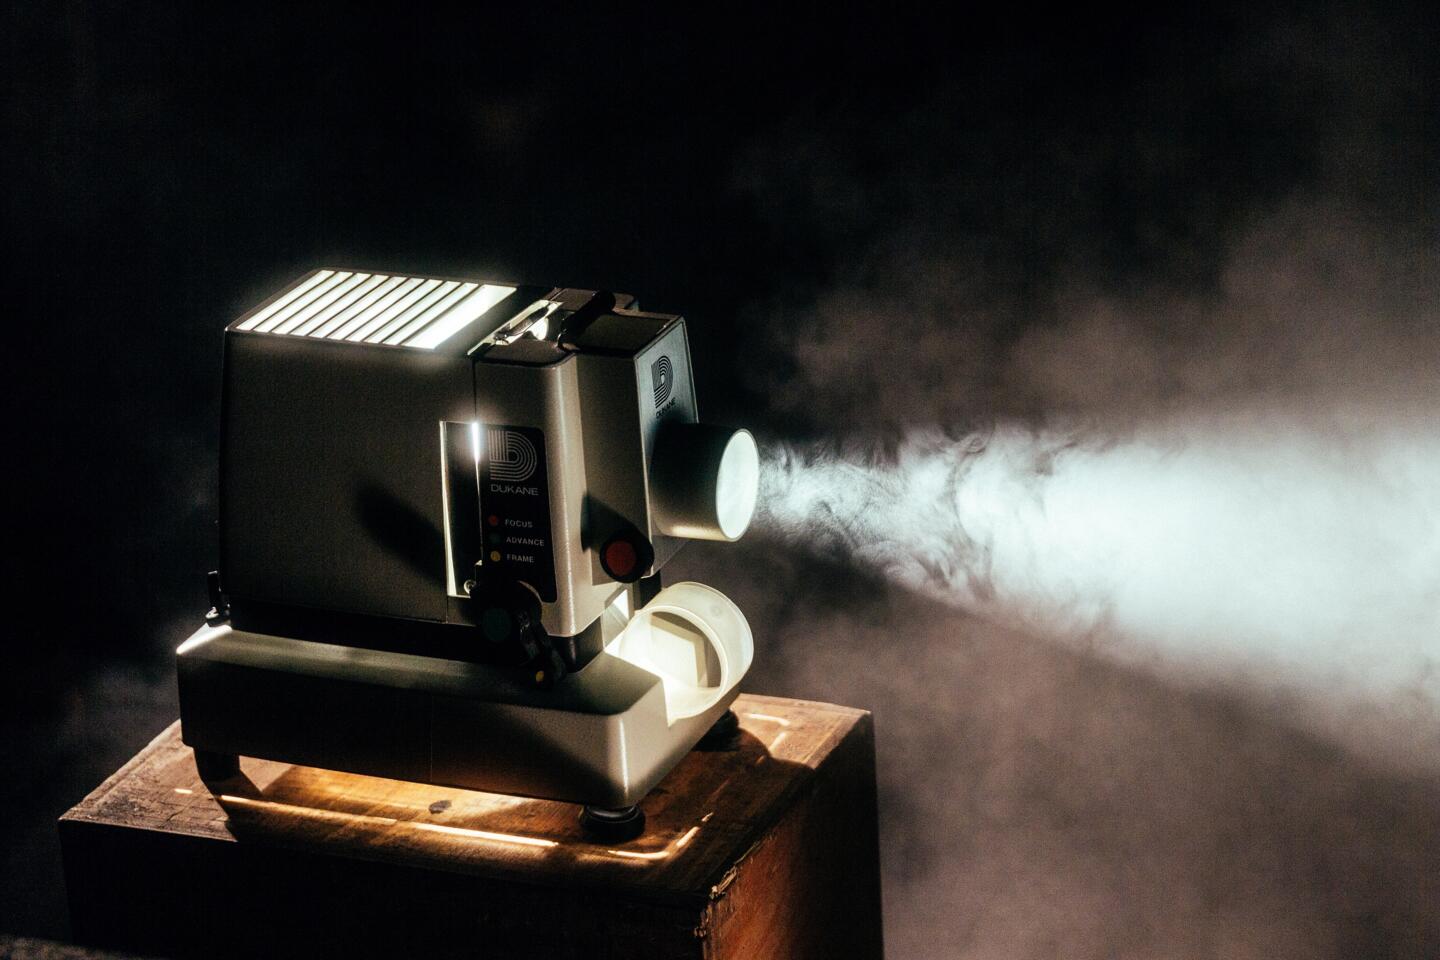 Vintage film projector casting a beam of light through atmospheric smoke, capturing the nostalgic ambiance at the Angoulême Francophone Film Festival.